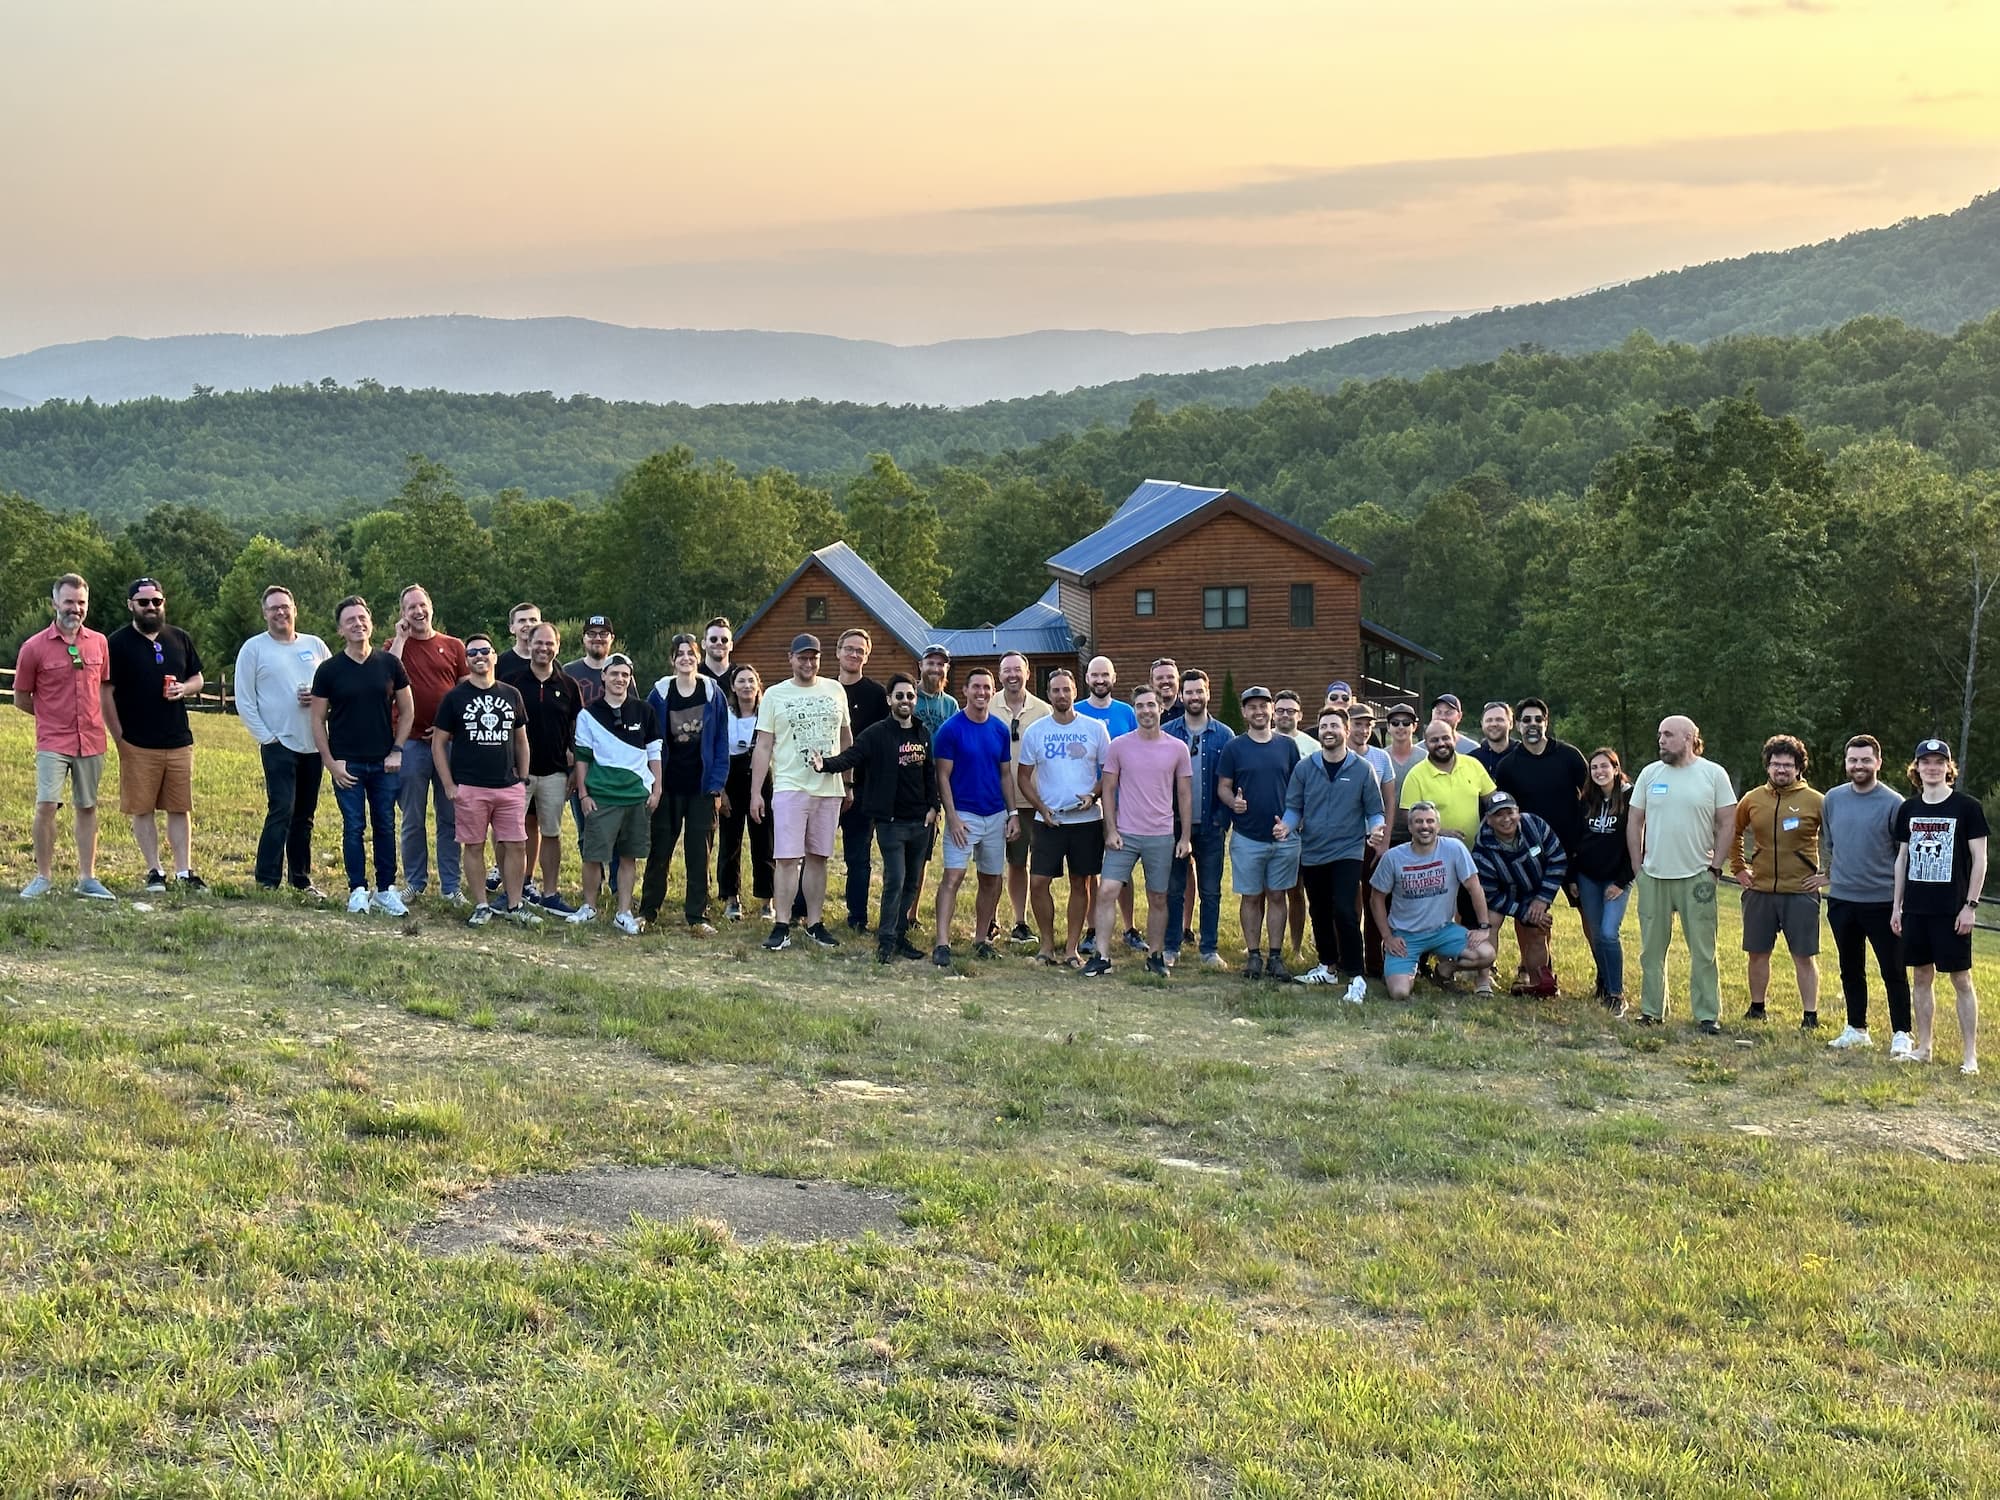 Group shot of Flat Camp attendees taken with a drone